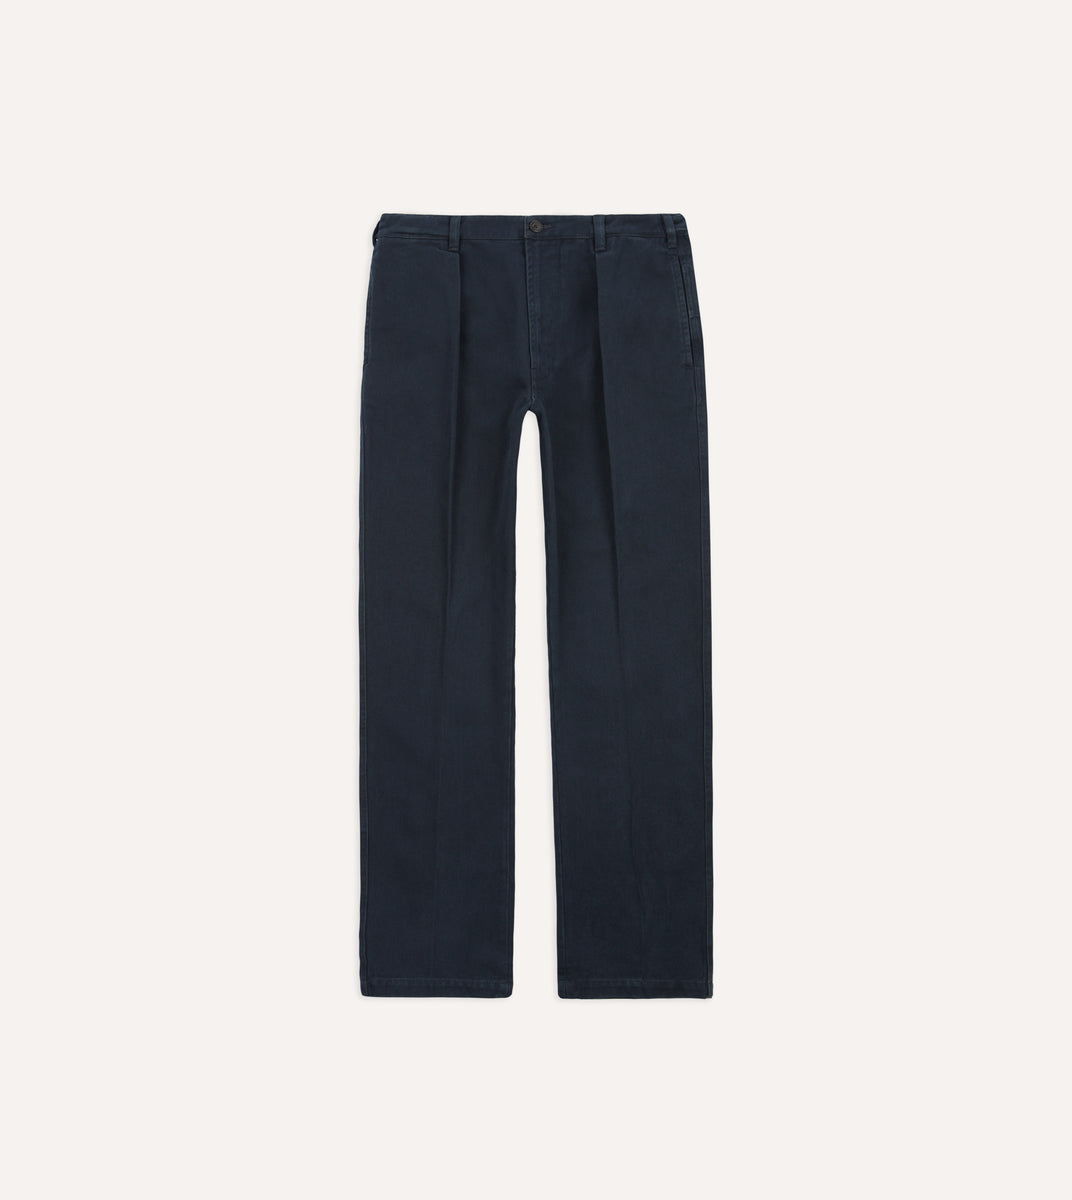 Diarte Palmer Recycled Cotton Pant - Navy